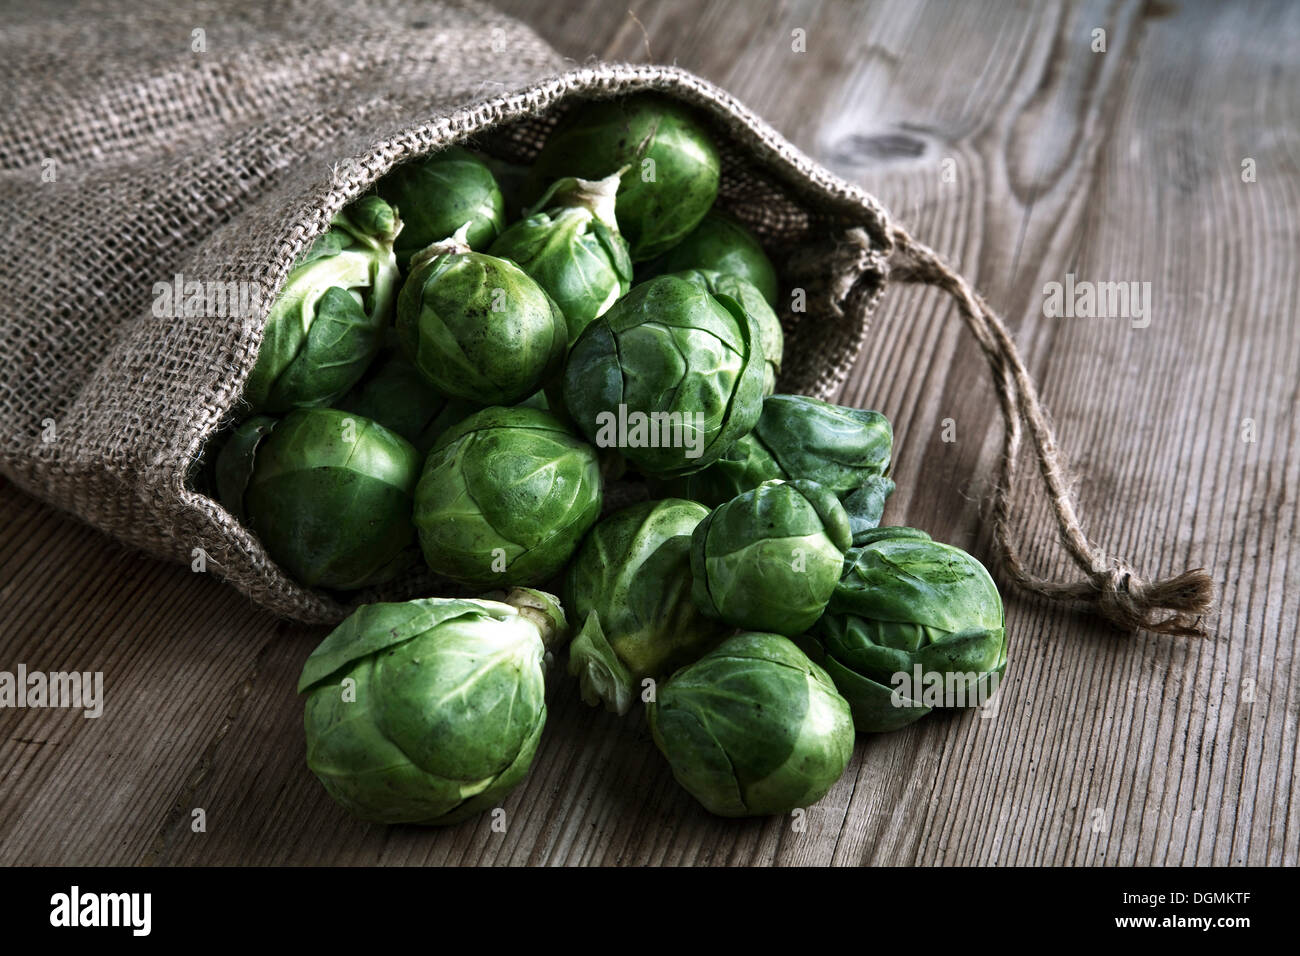 Organic Brussels sprouts in a jute sack on a wooden surface Stock Photo